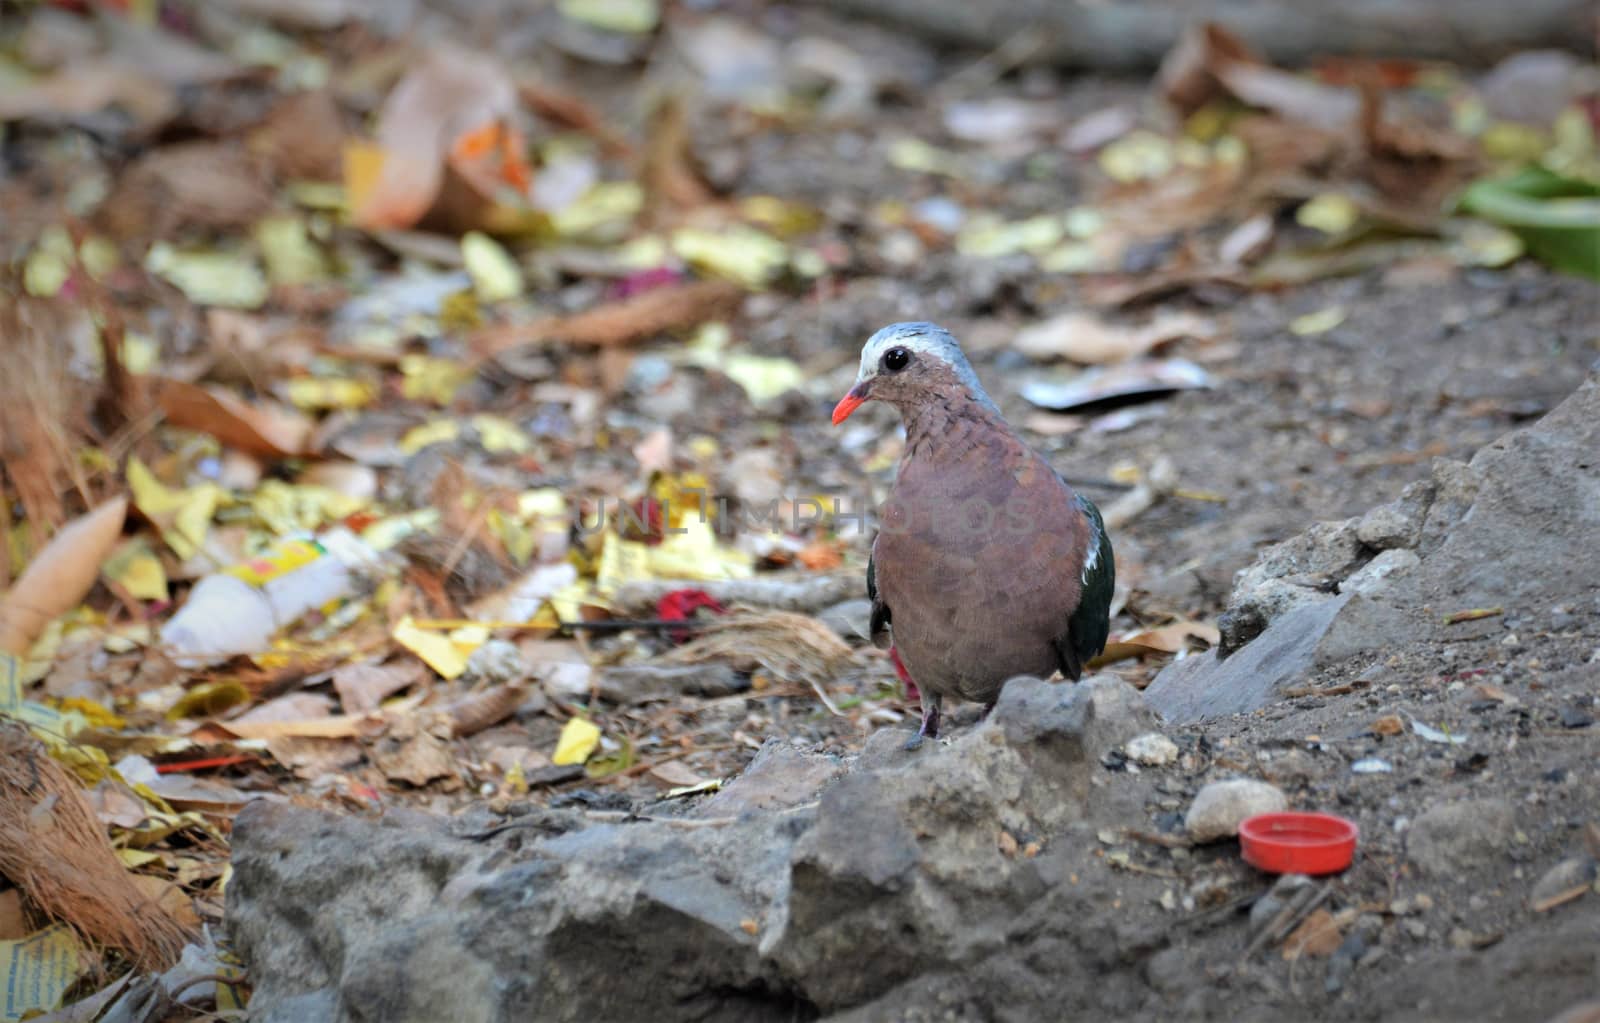 Asian emerald dove forging on colossal waste of temple wastage by rkbalaji